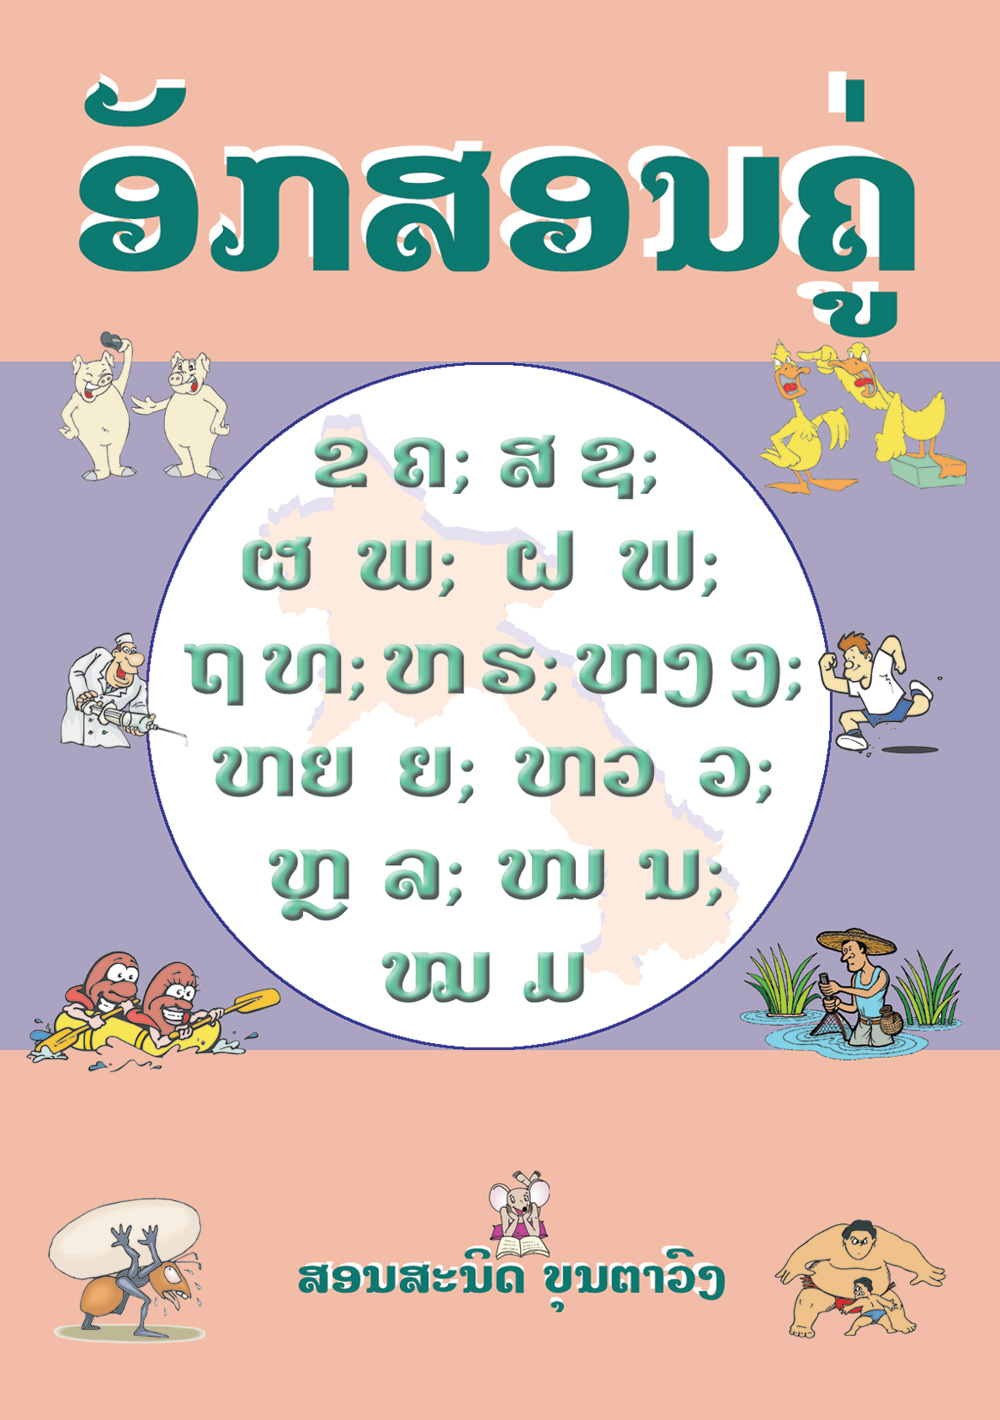 Consonants High and Low large book cover, published in Lao language